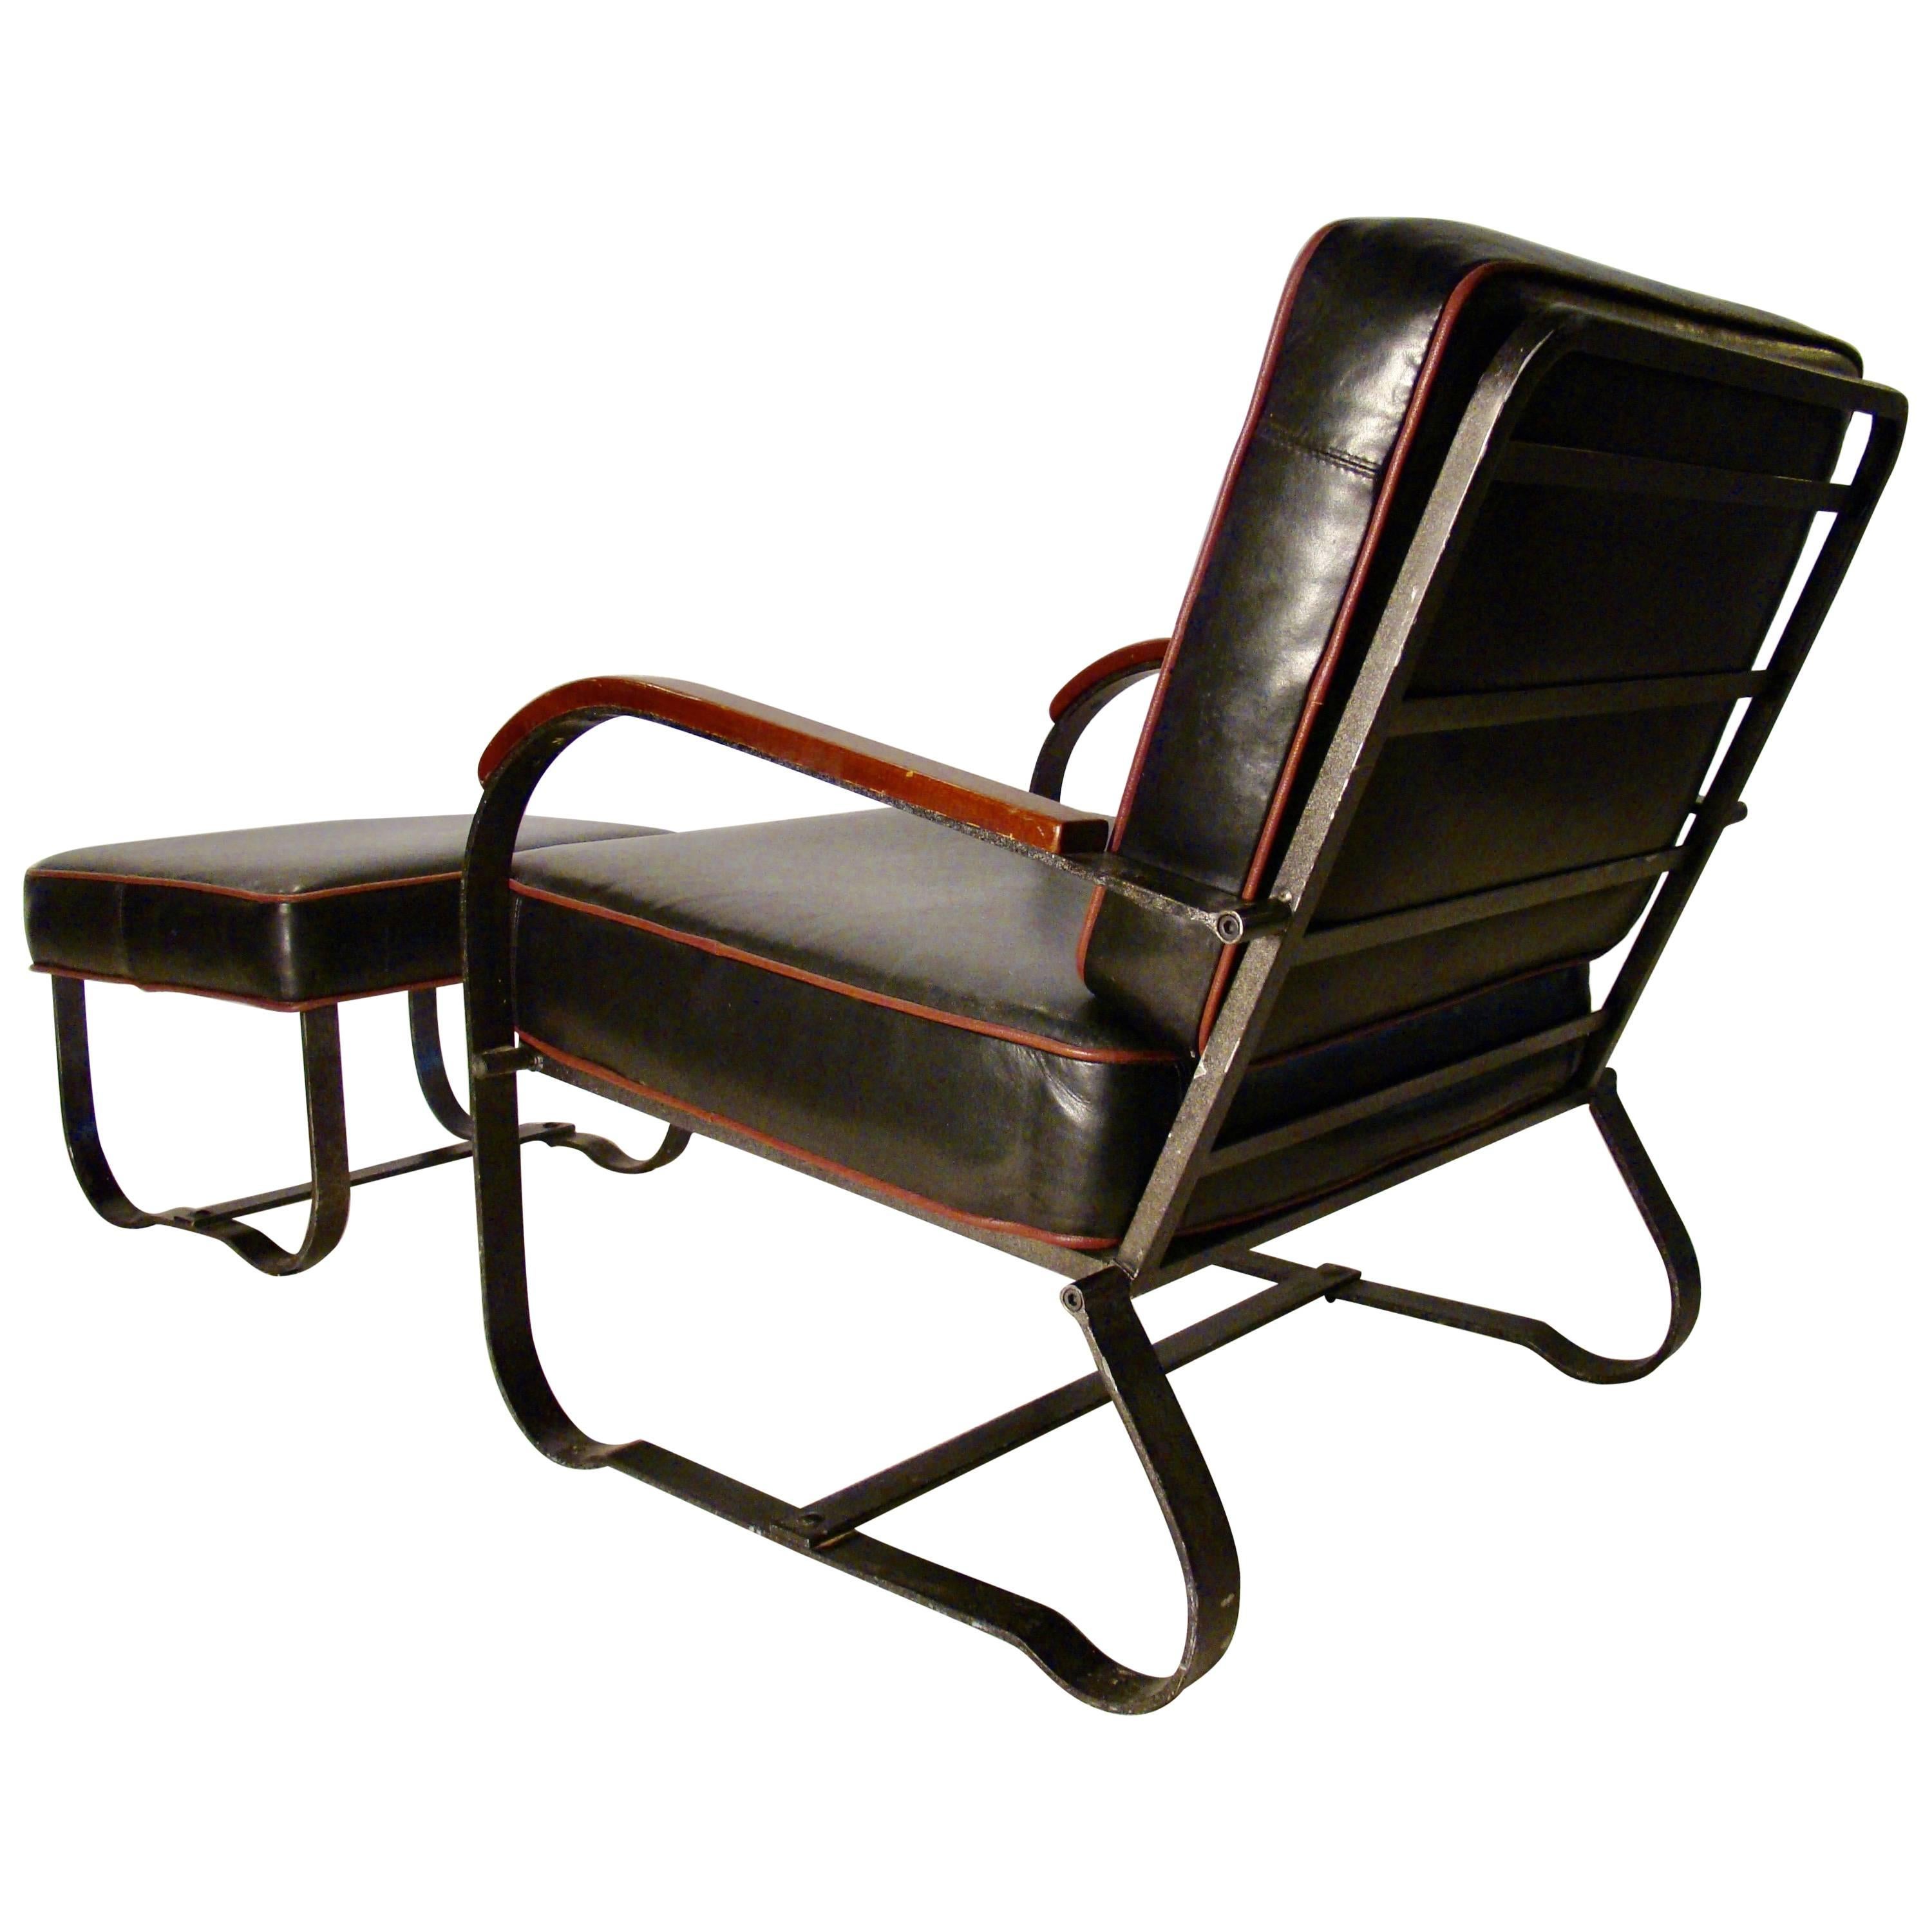 Elusive Art Deco Machine Age Steel Lounge Chair and Ottoman by McKay